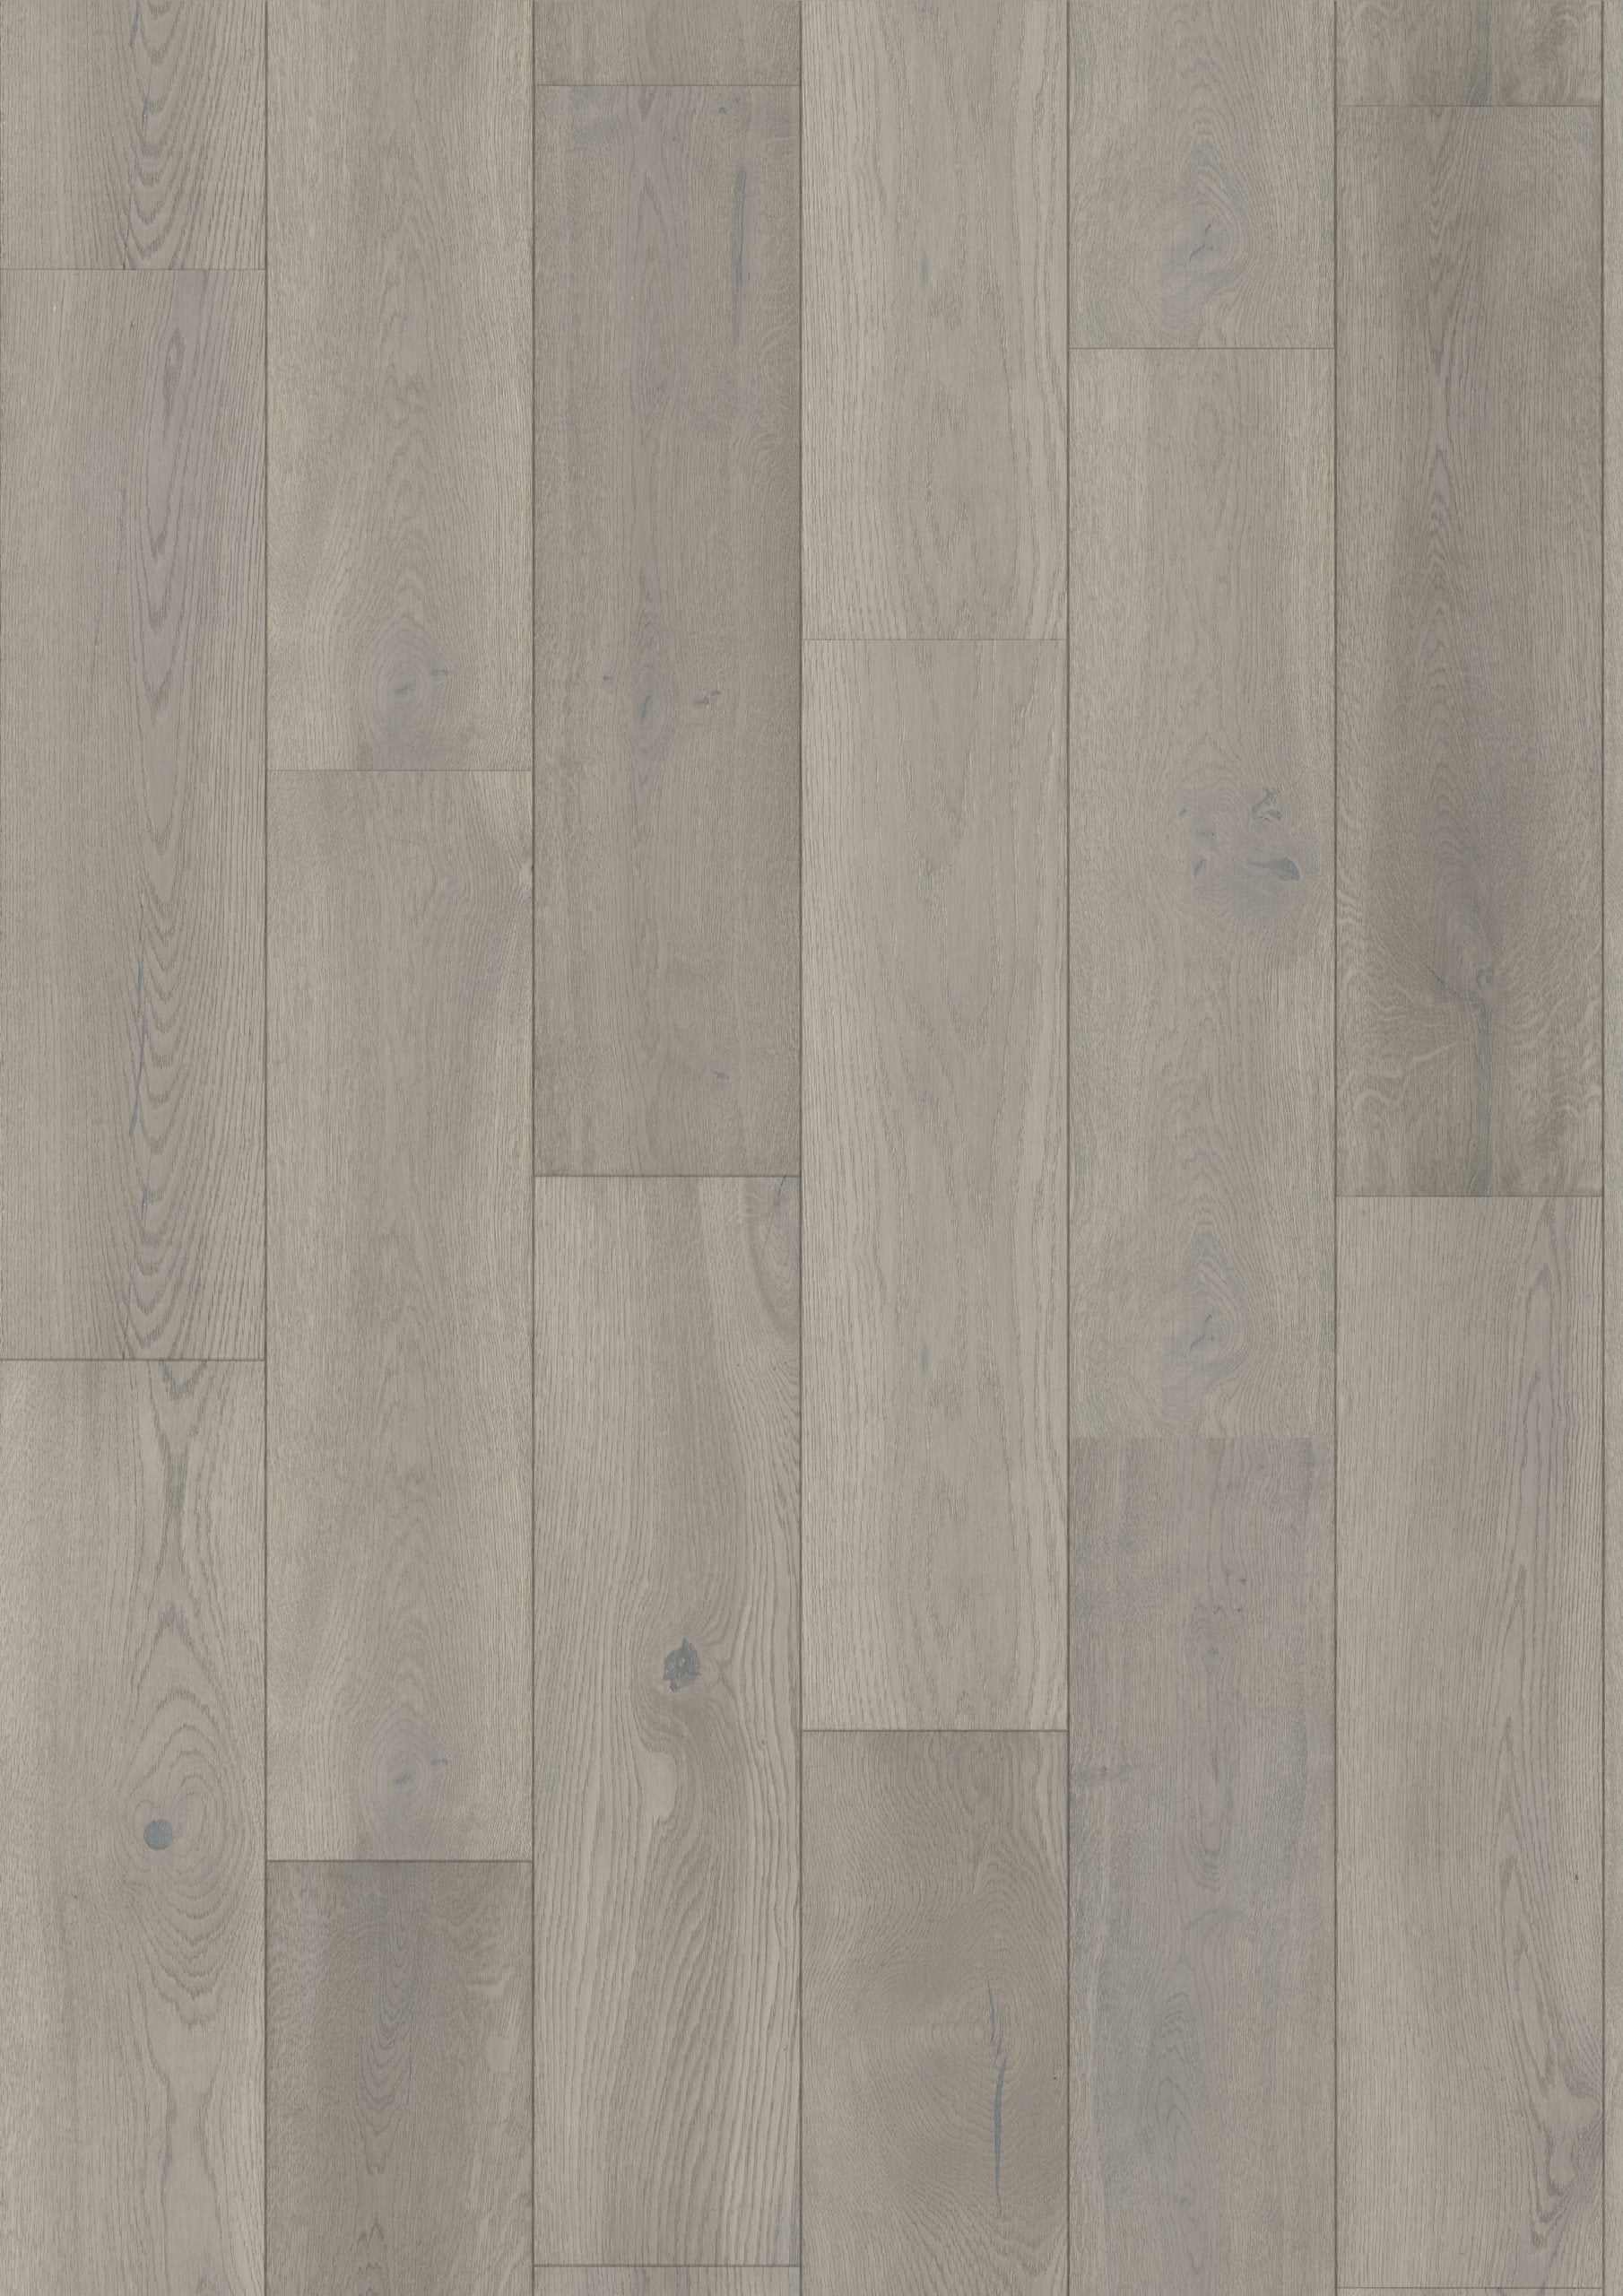 teka royal dover german french white oak natural hardwood flooring plank stain light grey distributed by surface group international